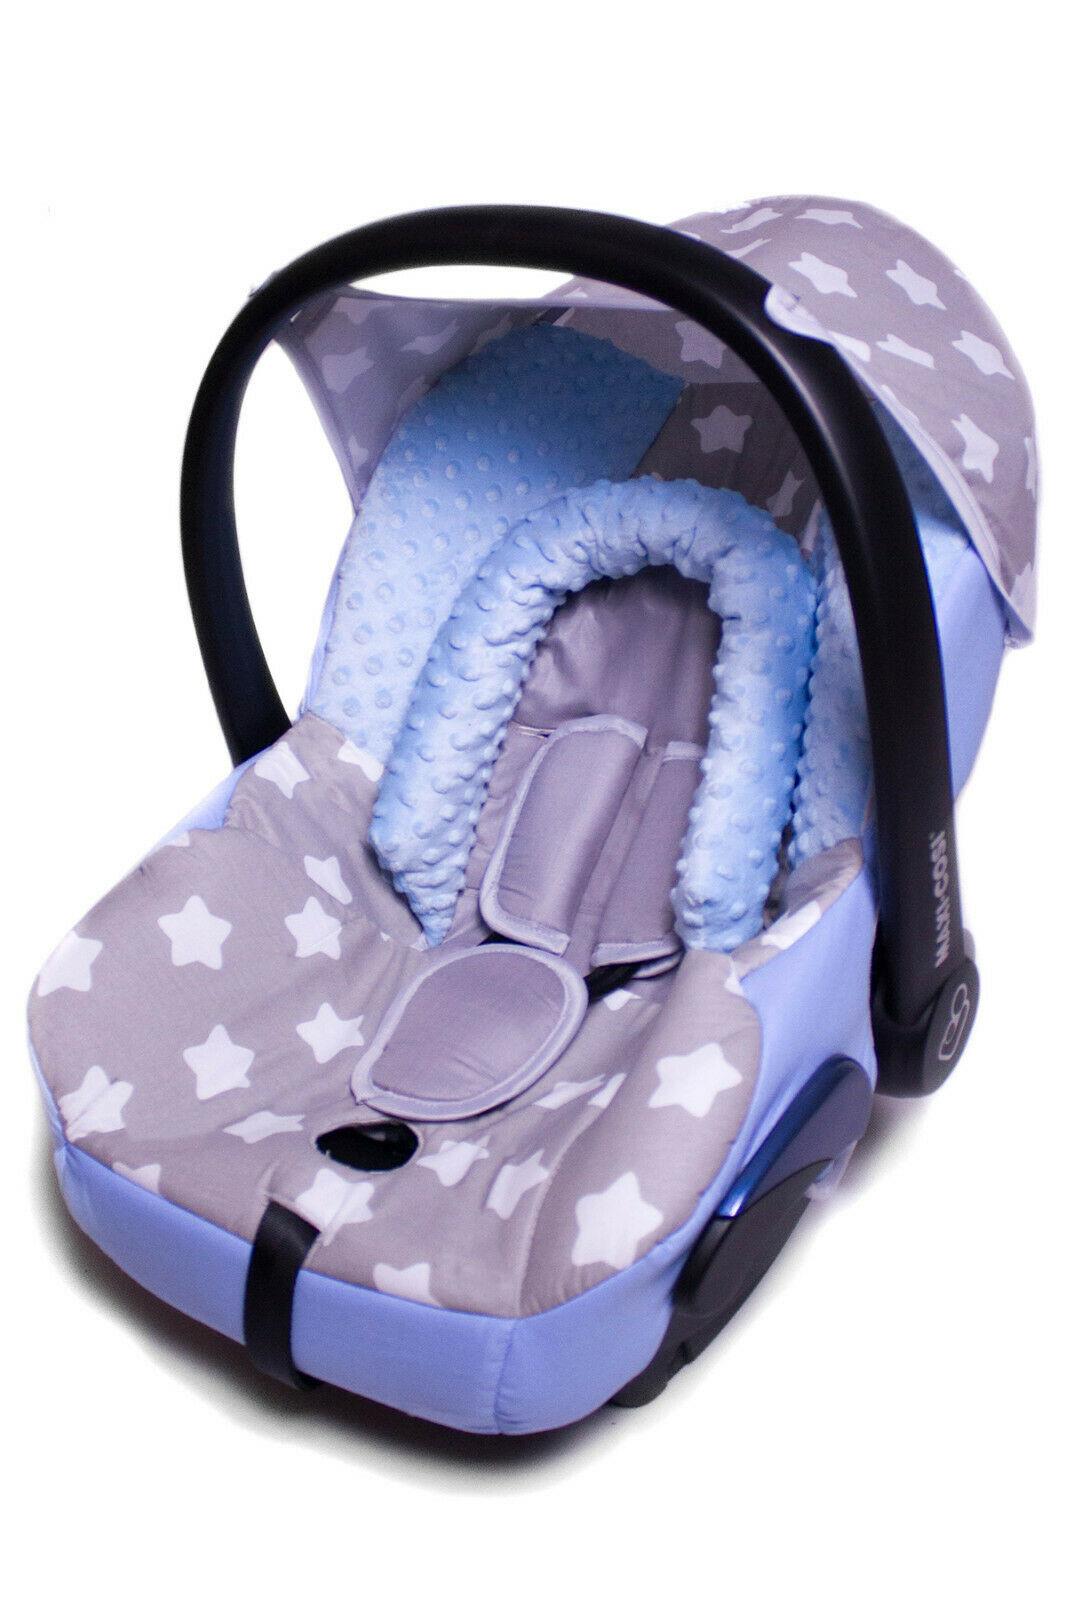 Full Cover Set Fitting Maxi Cosi Cabriofix Baby Car Seat - Big Stars With Grey / Blue